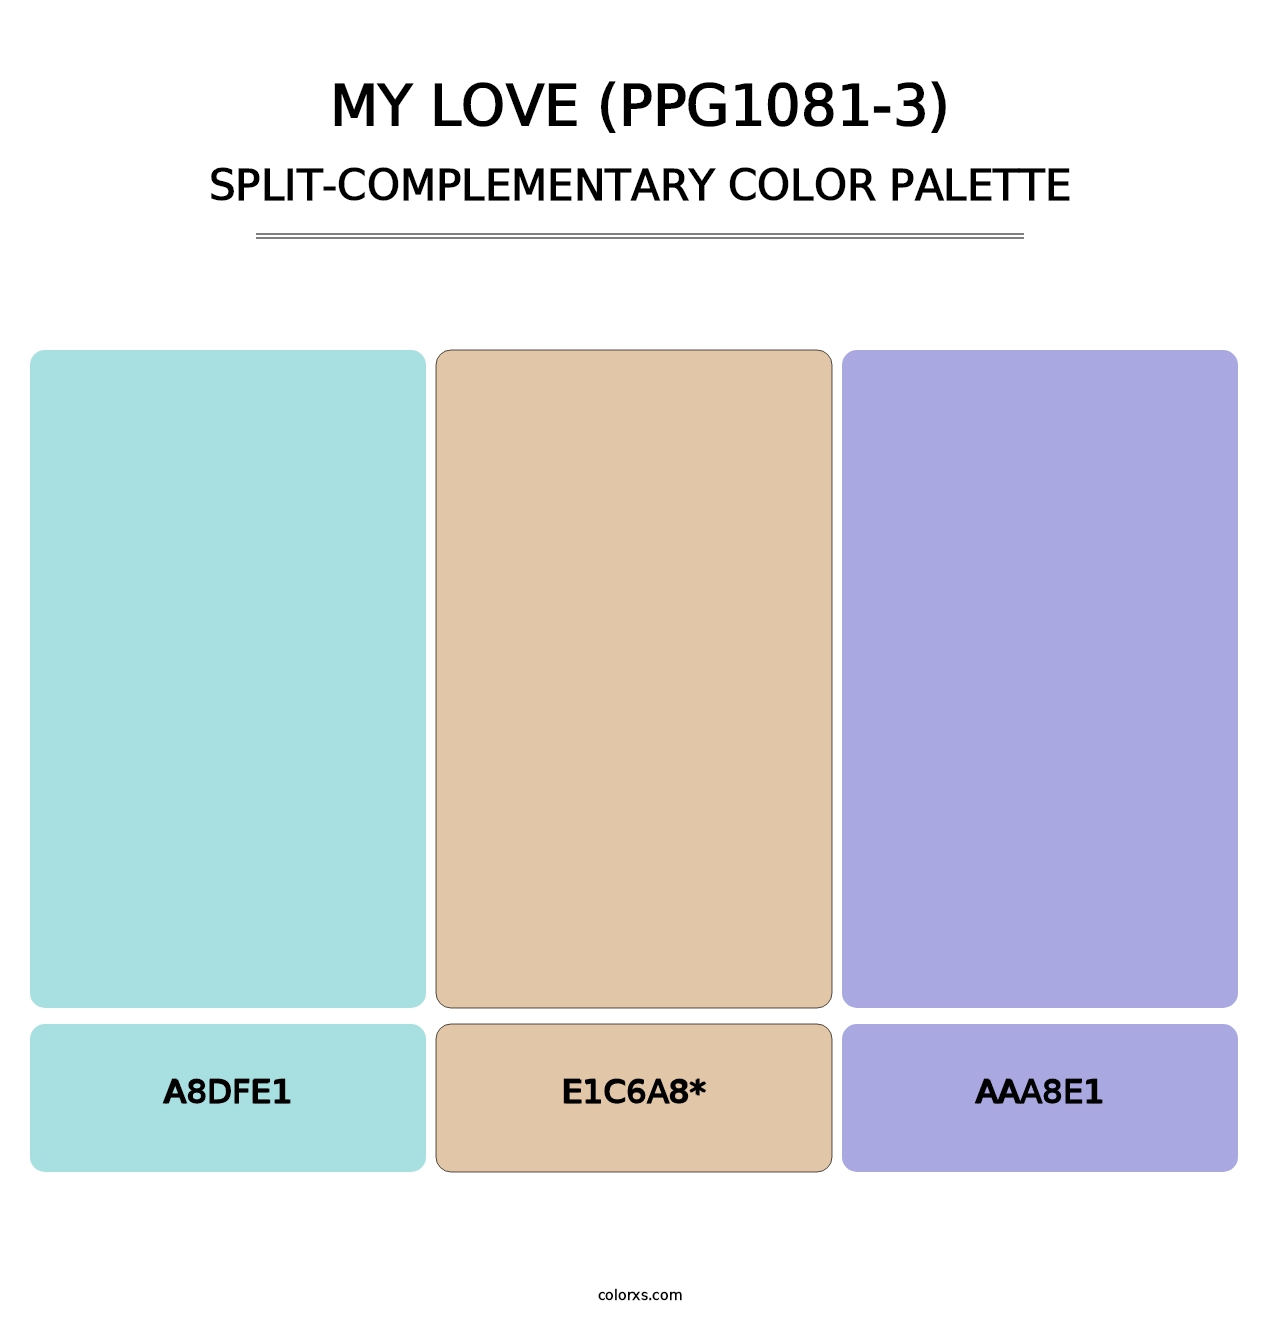 My Love (PPG1081-3) - Split-Complementary Color Palette